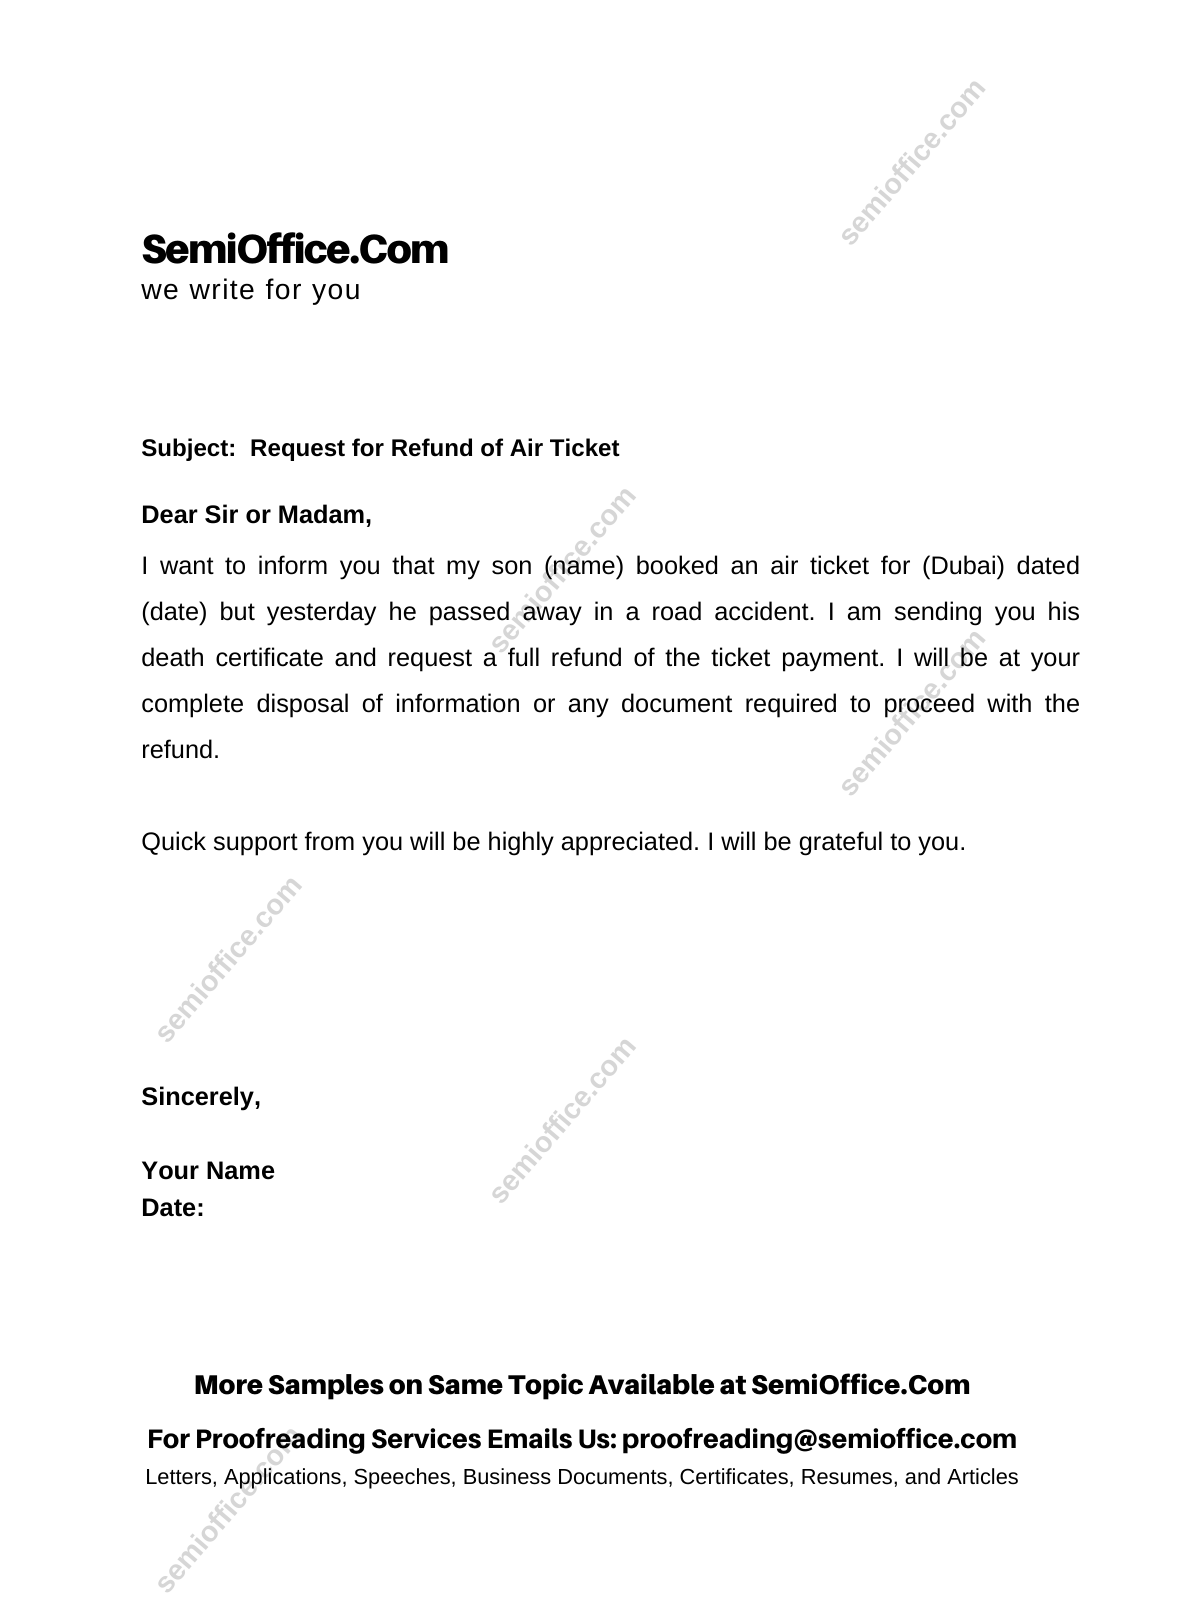 request-letter-for-refund-of-air-ticket-to-airline-semioffice-com